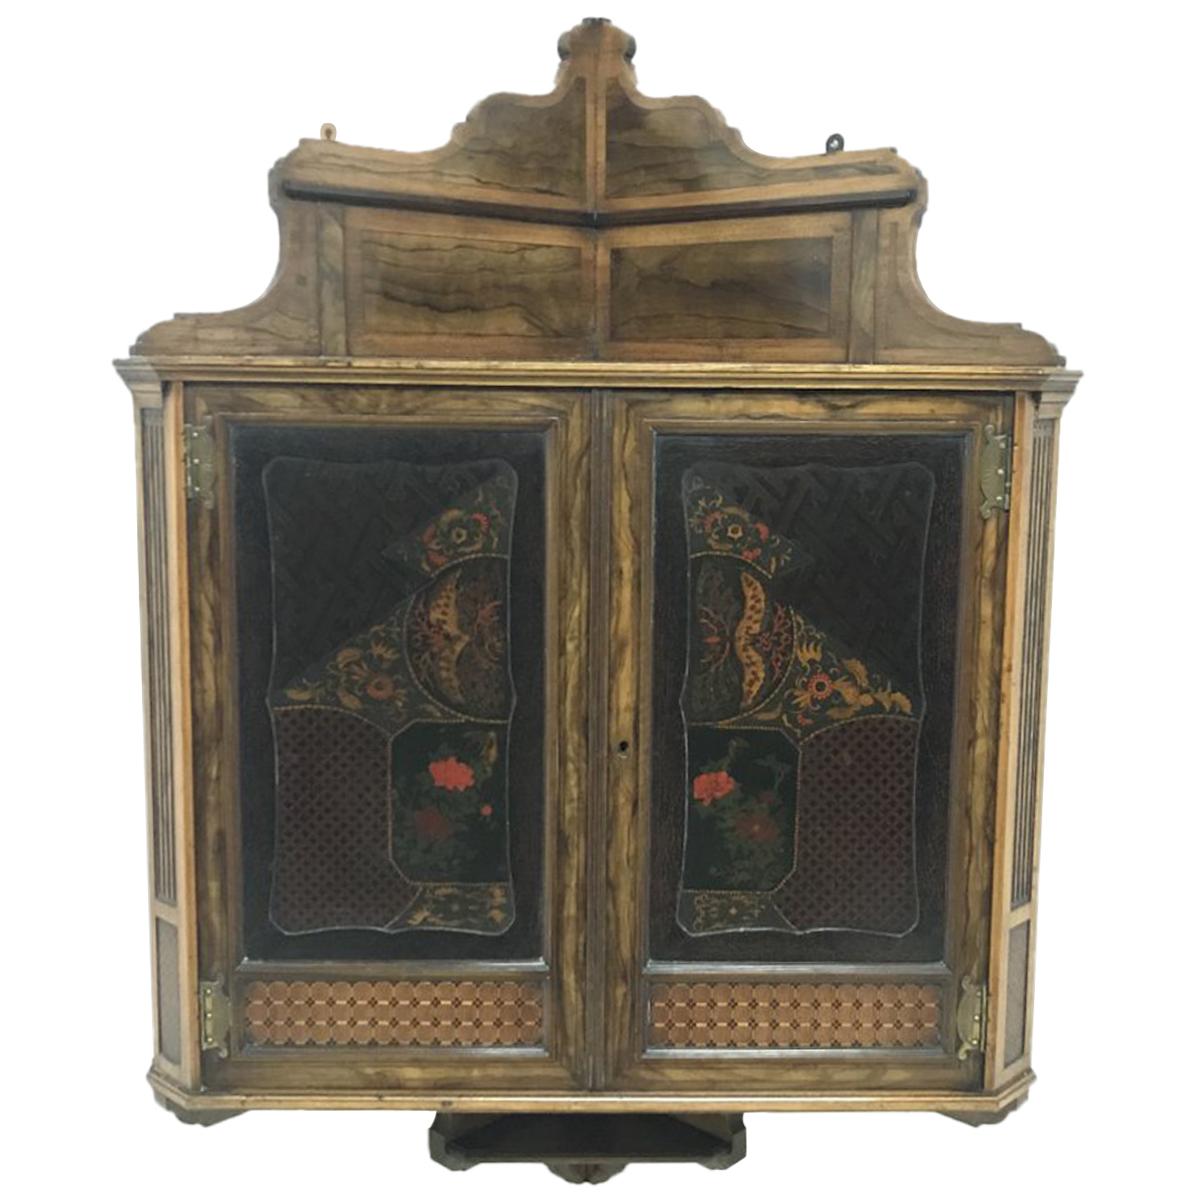 Gillows & Co, Thomas Jeckyll Attr An Anglo-Japanese Marquetry Corner Cupboard